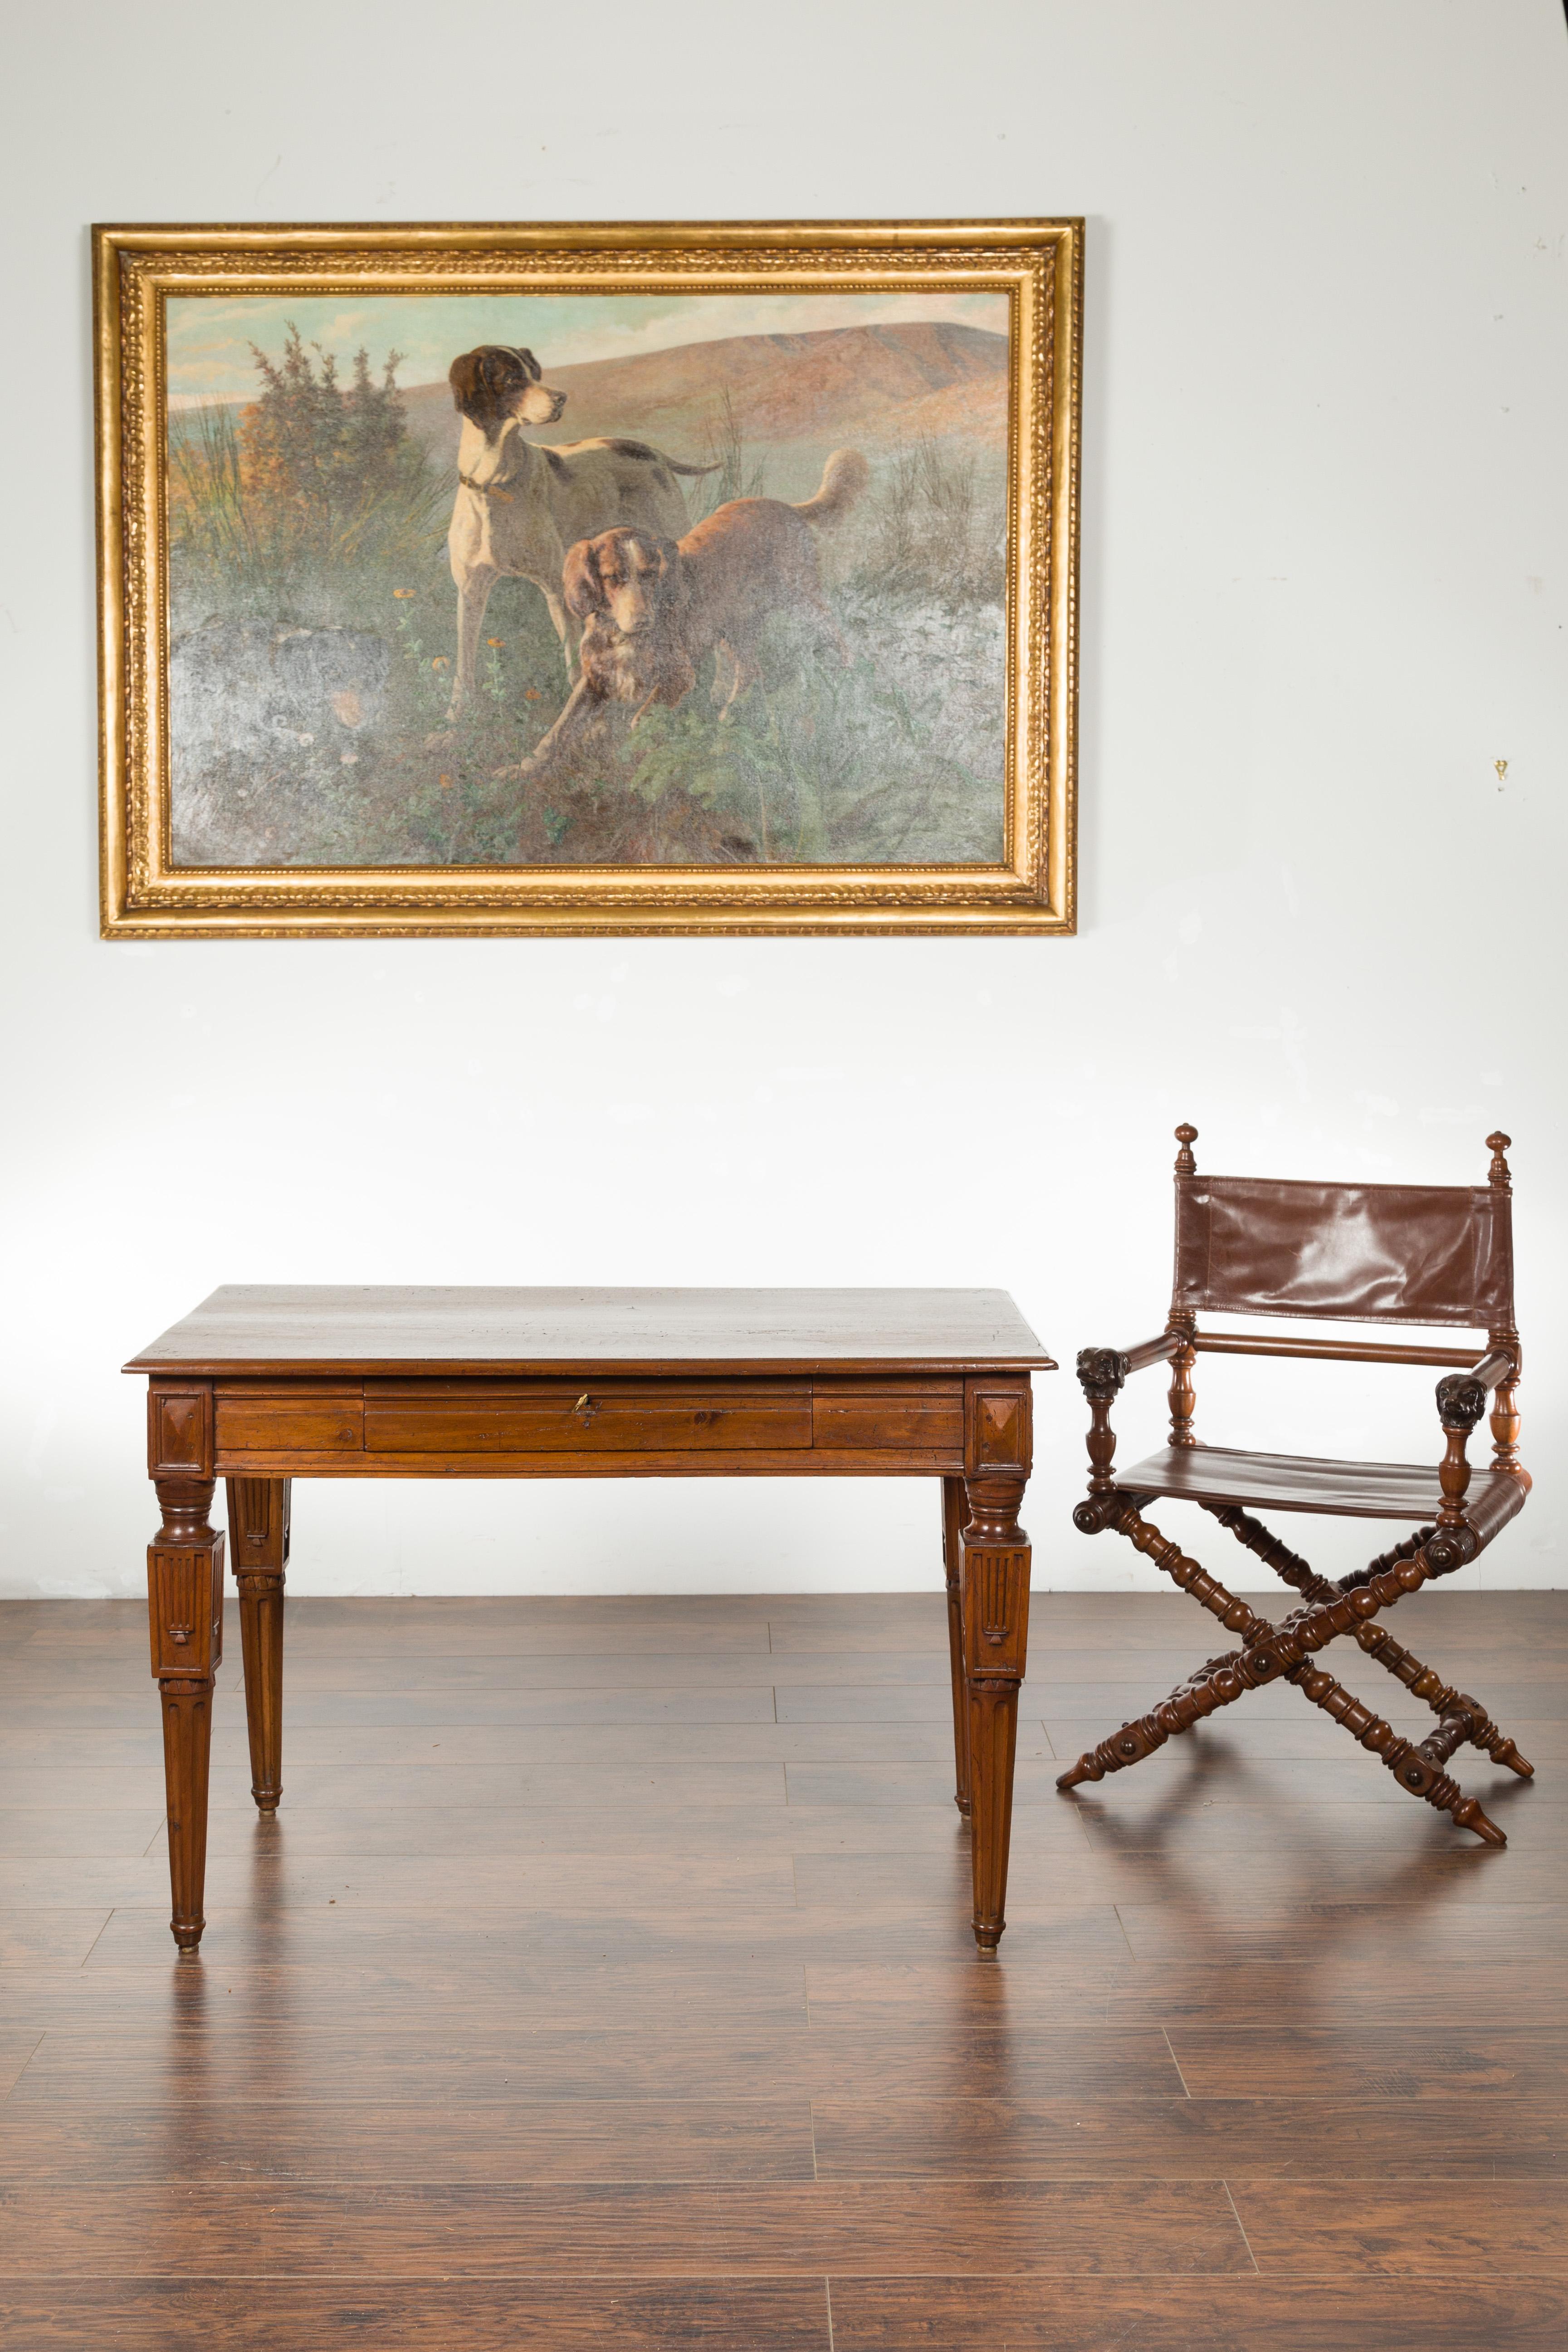 An Italian walnut side table from the early 19th century, with carved fluted legs and single drawer. Created in Italy during the early years of the 19th century, this walnut side table features a rectangular planked top with single drawer in the